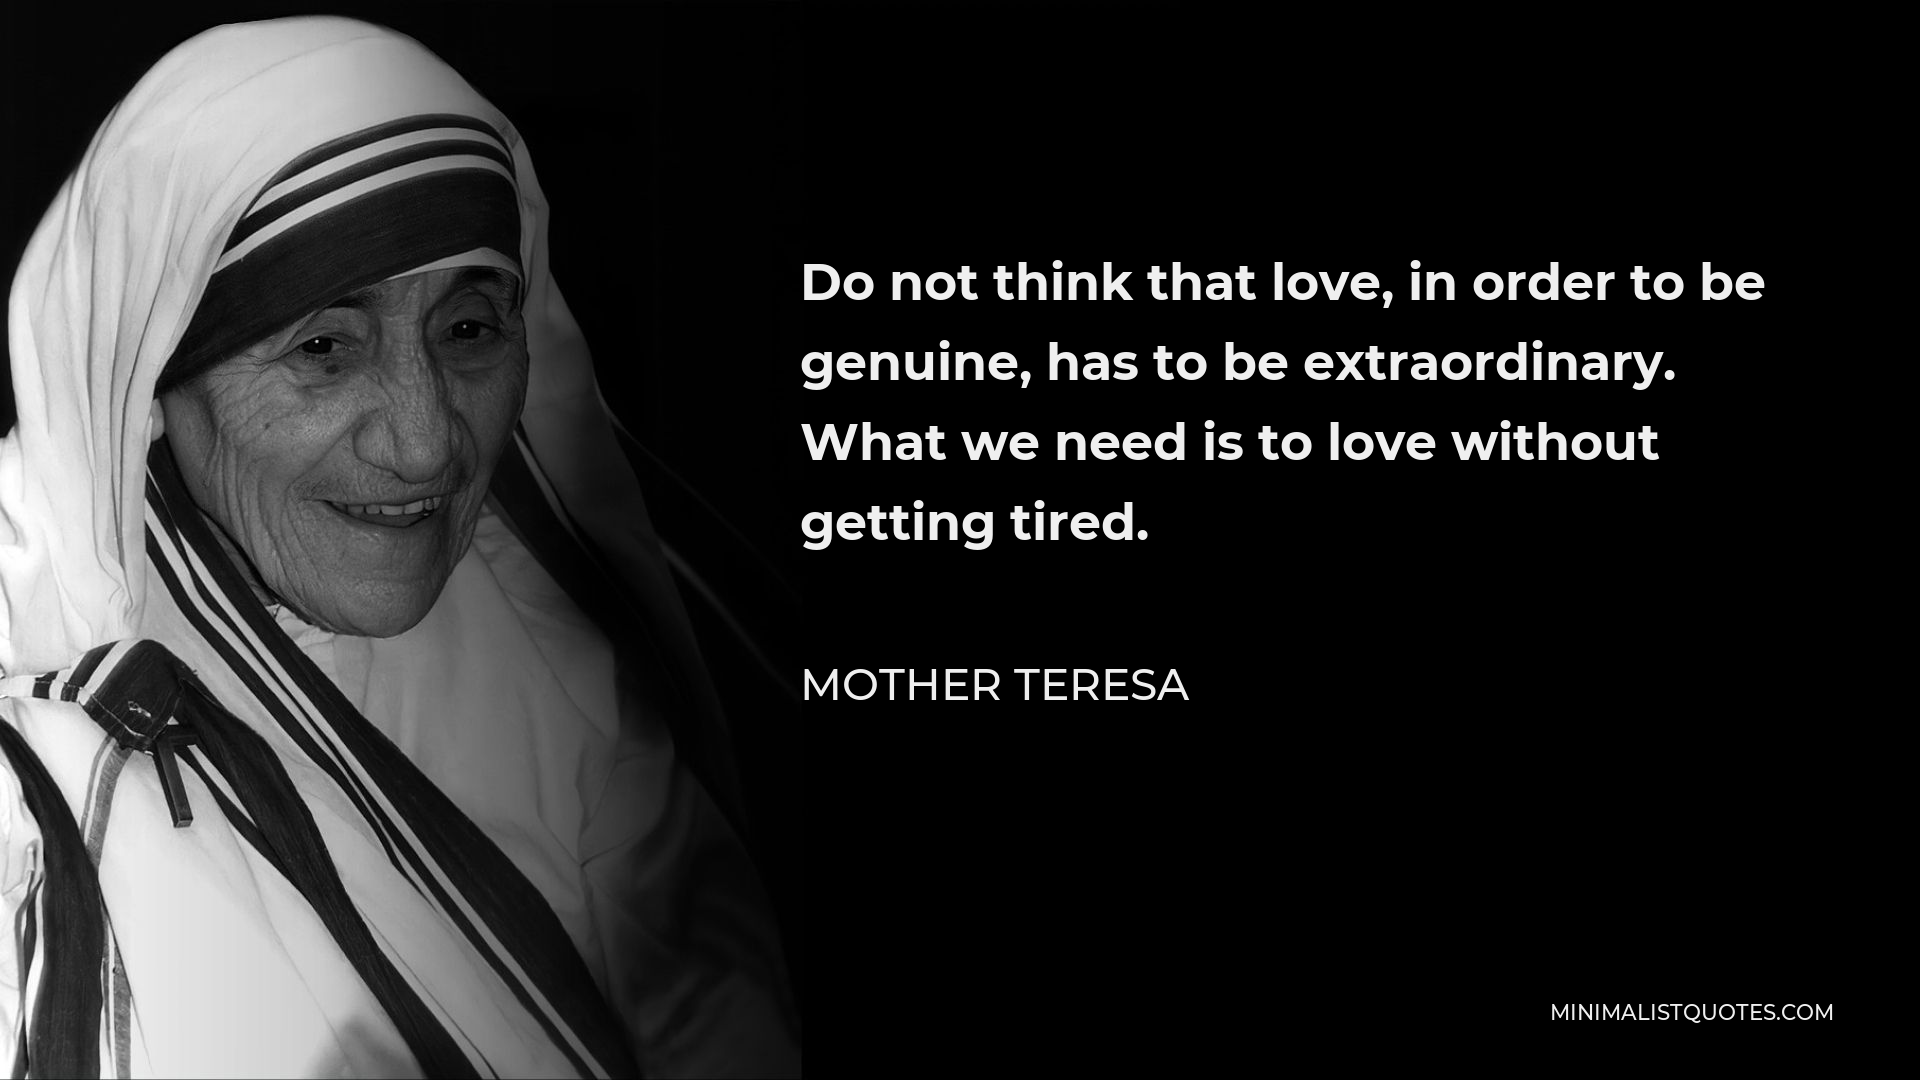 Mother Teresa Quote: Do not think that love in order to be genuine has ...